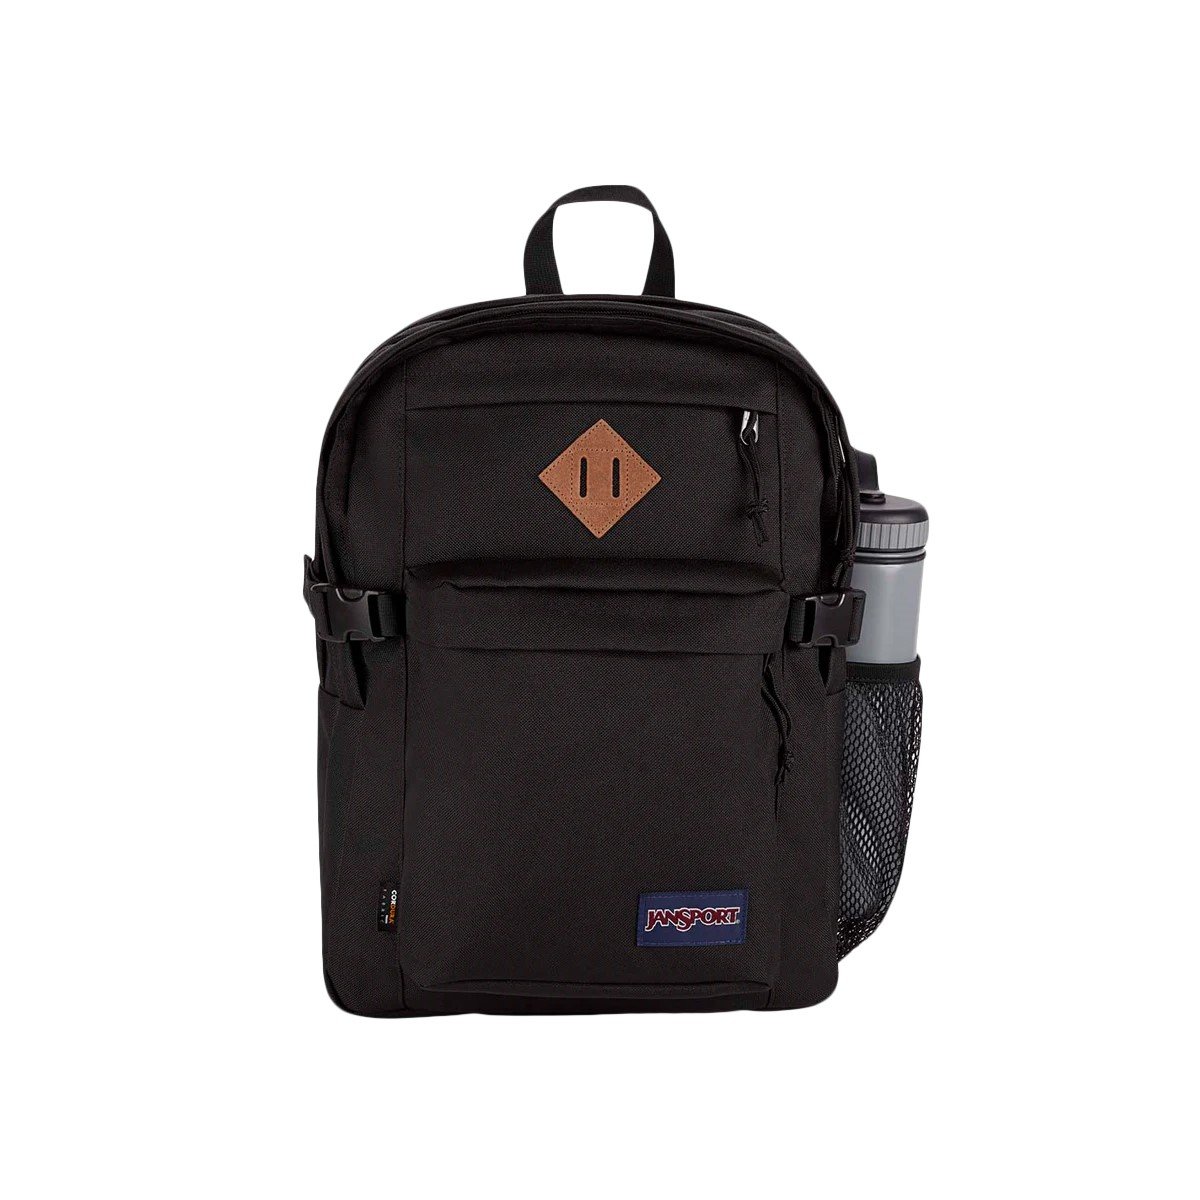 Main Campus Backpack in Black